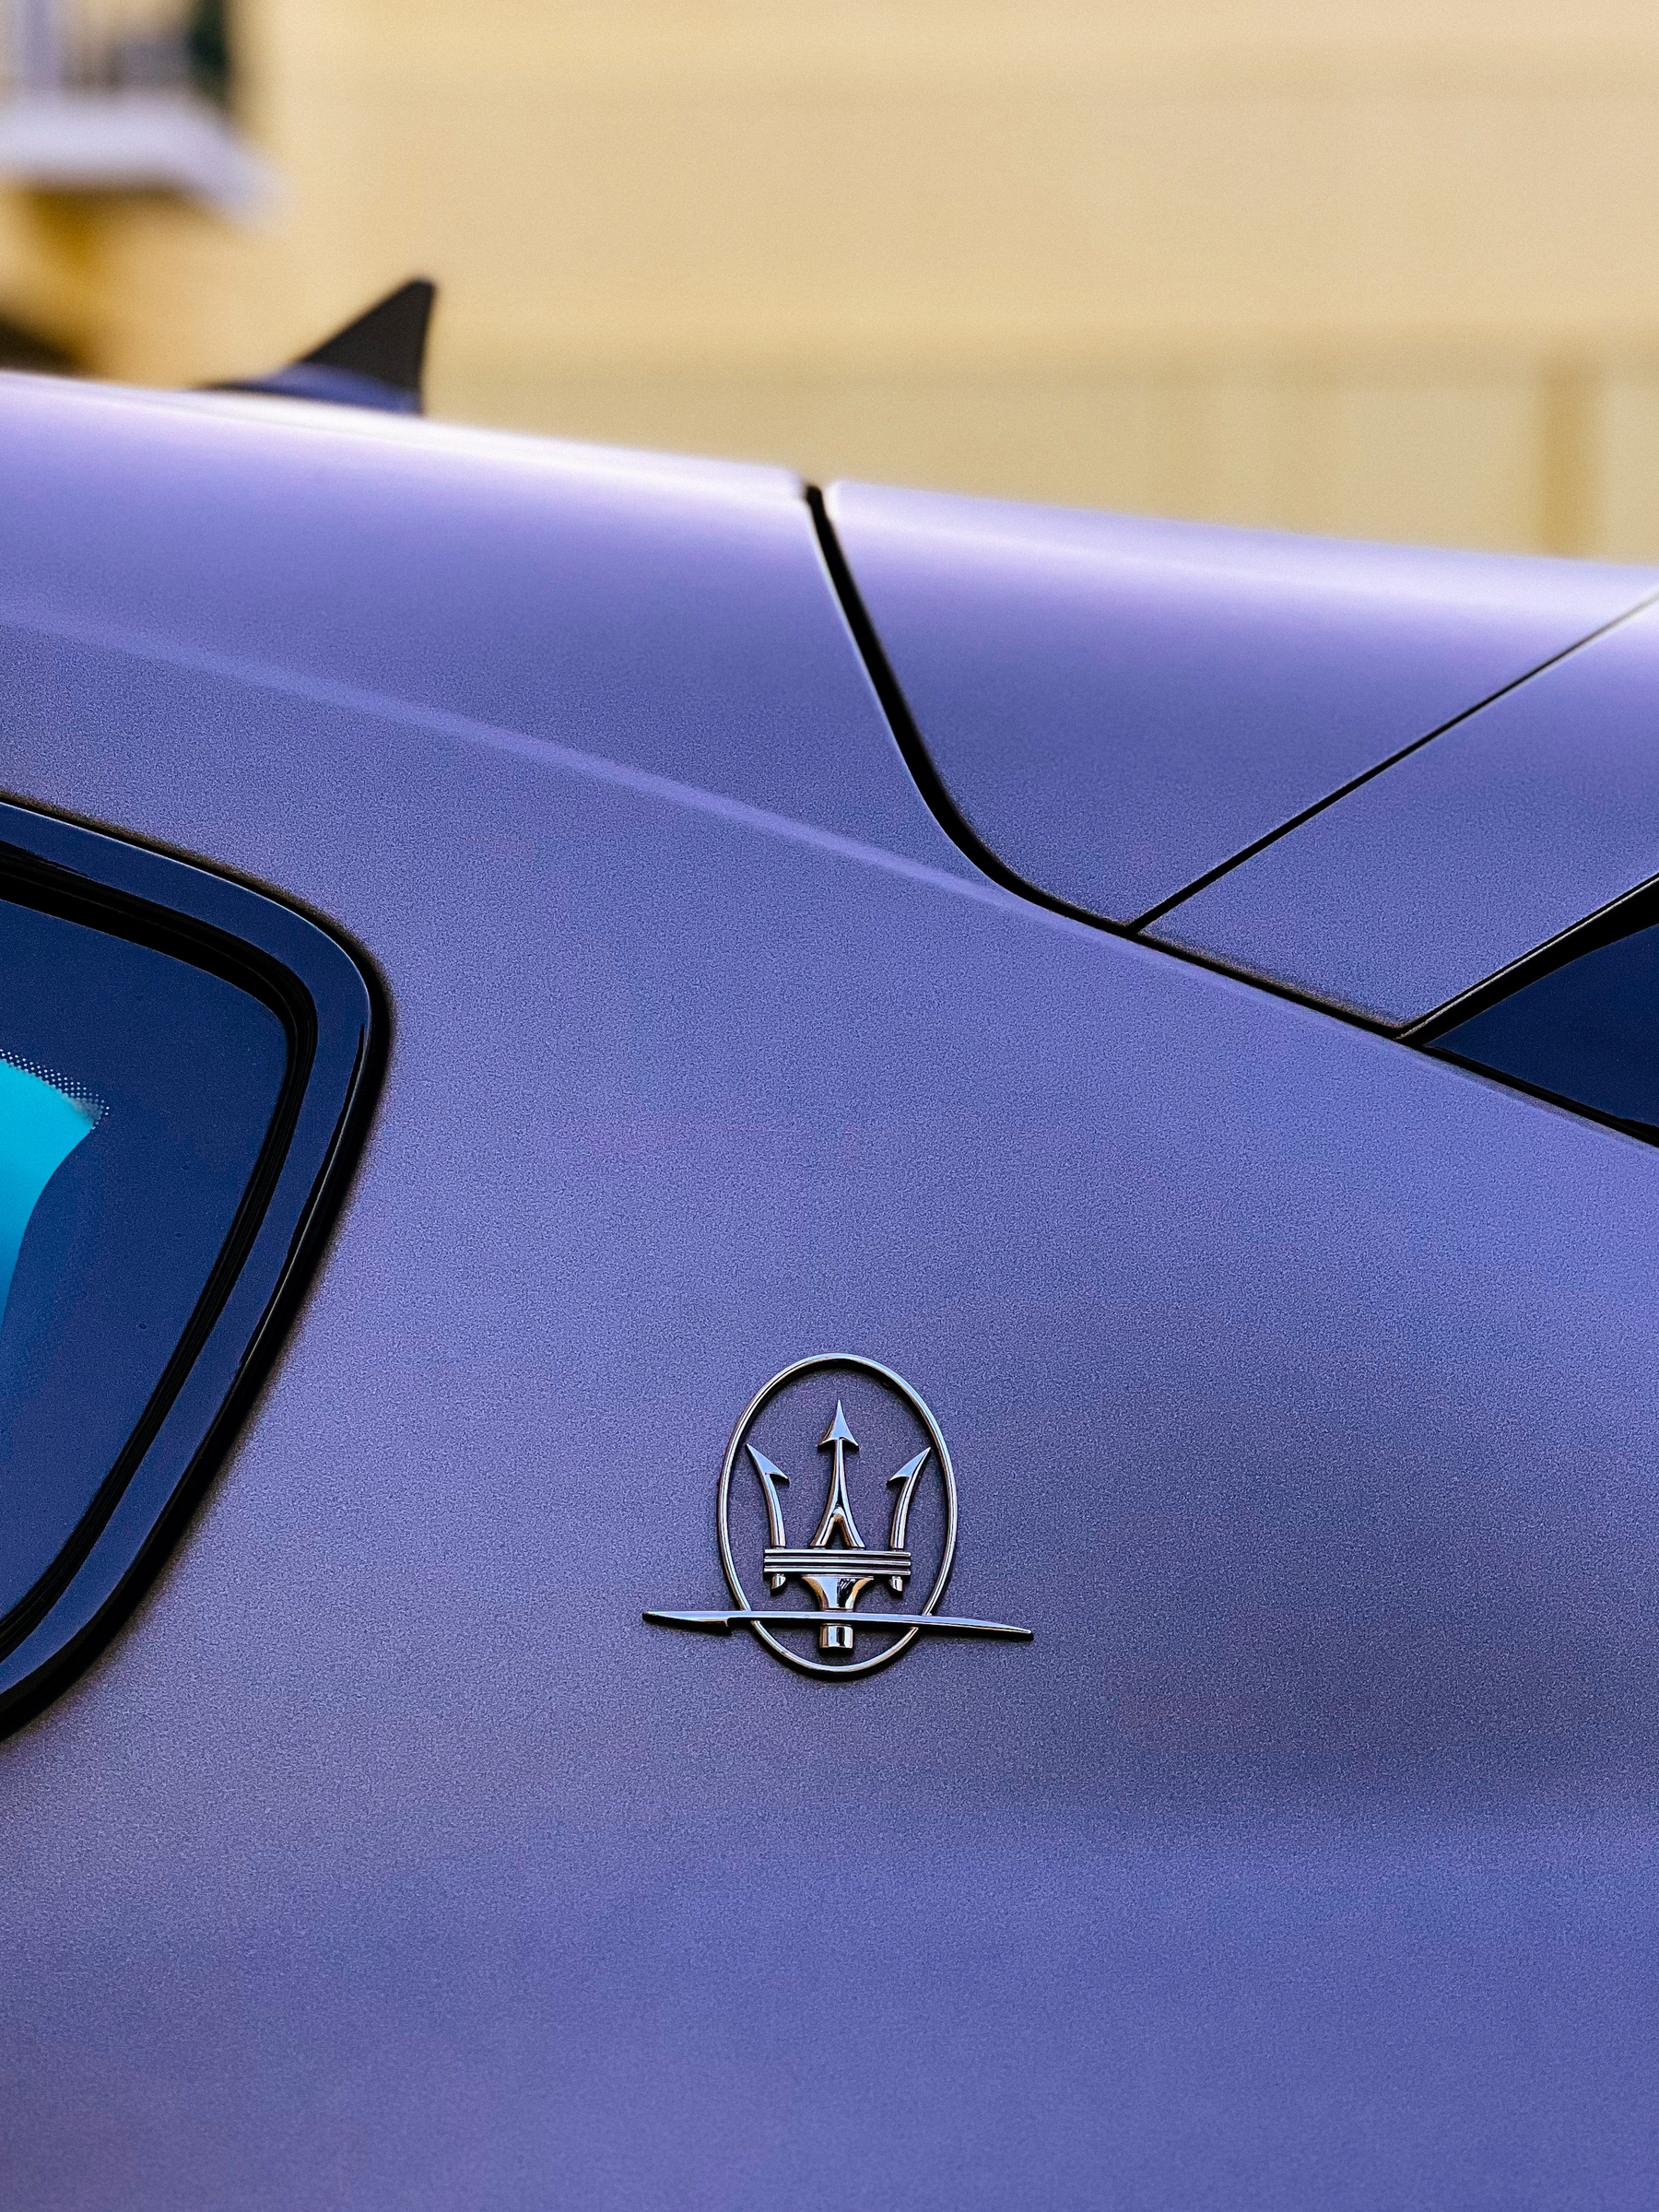 Detail of a Maserati logo on the side of a car.